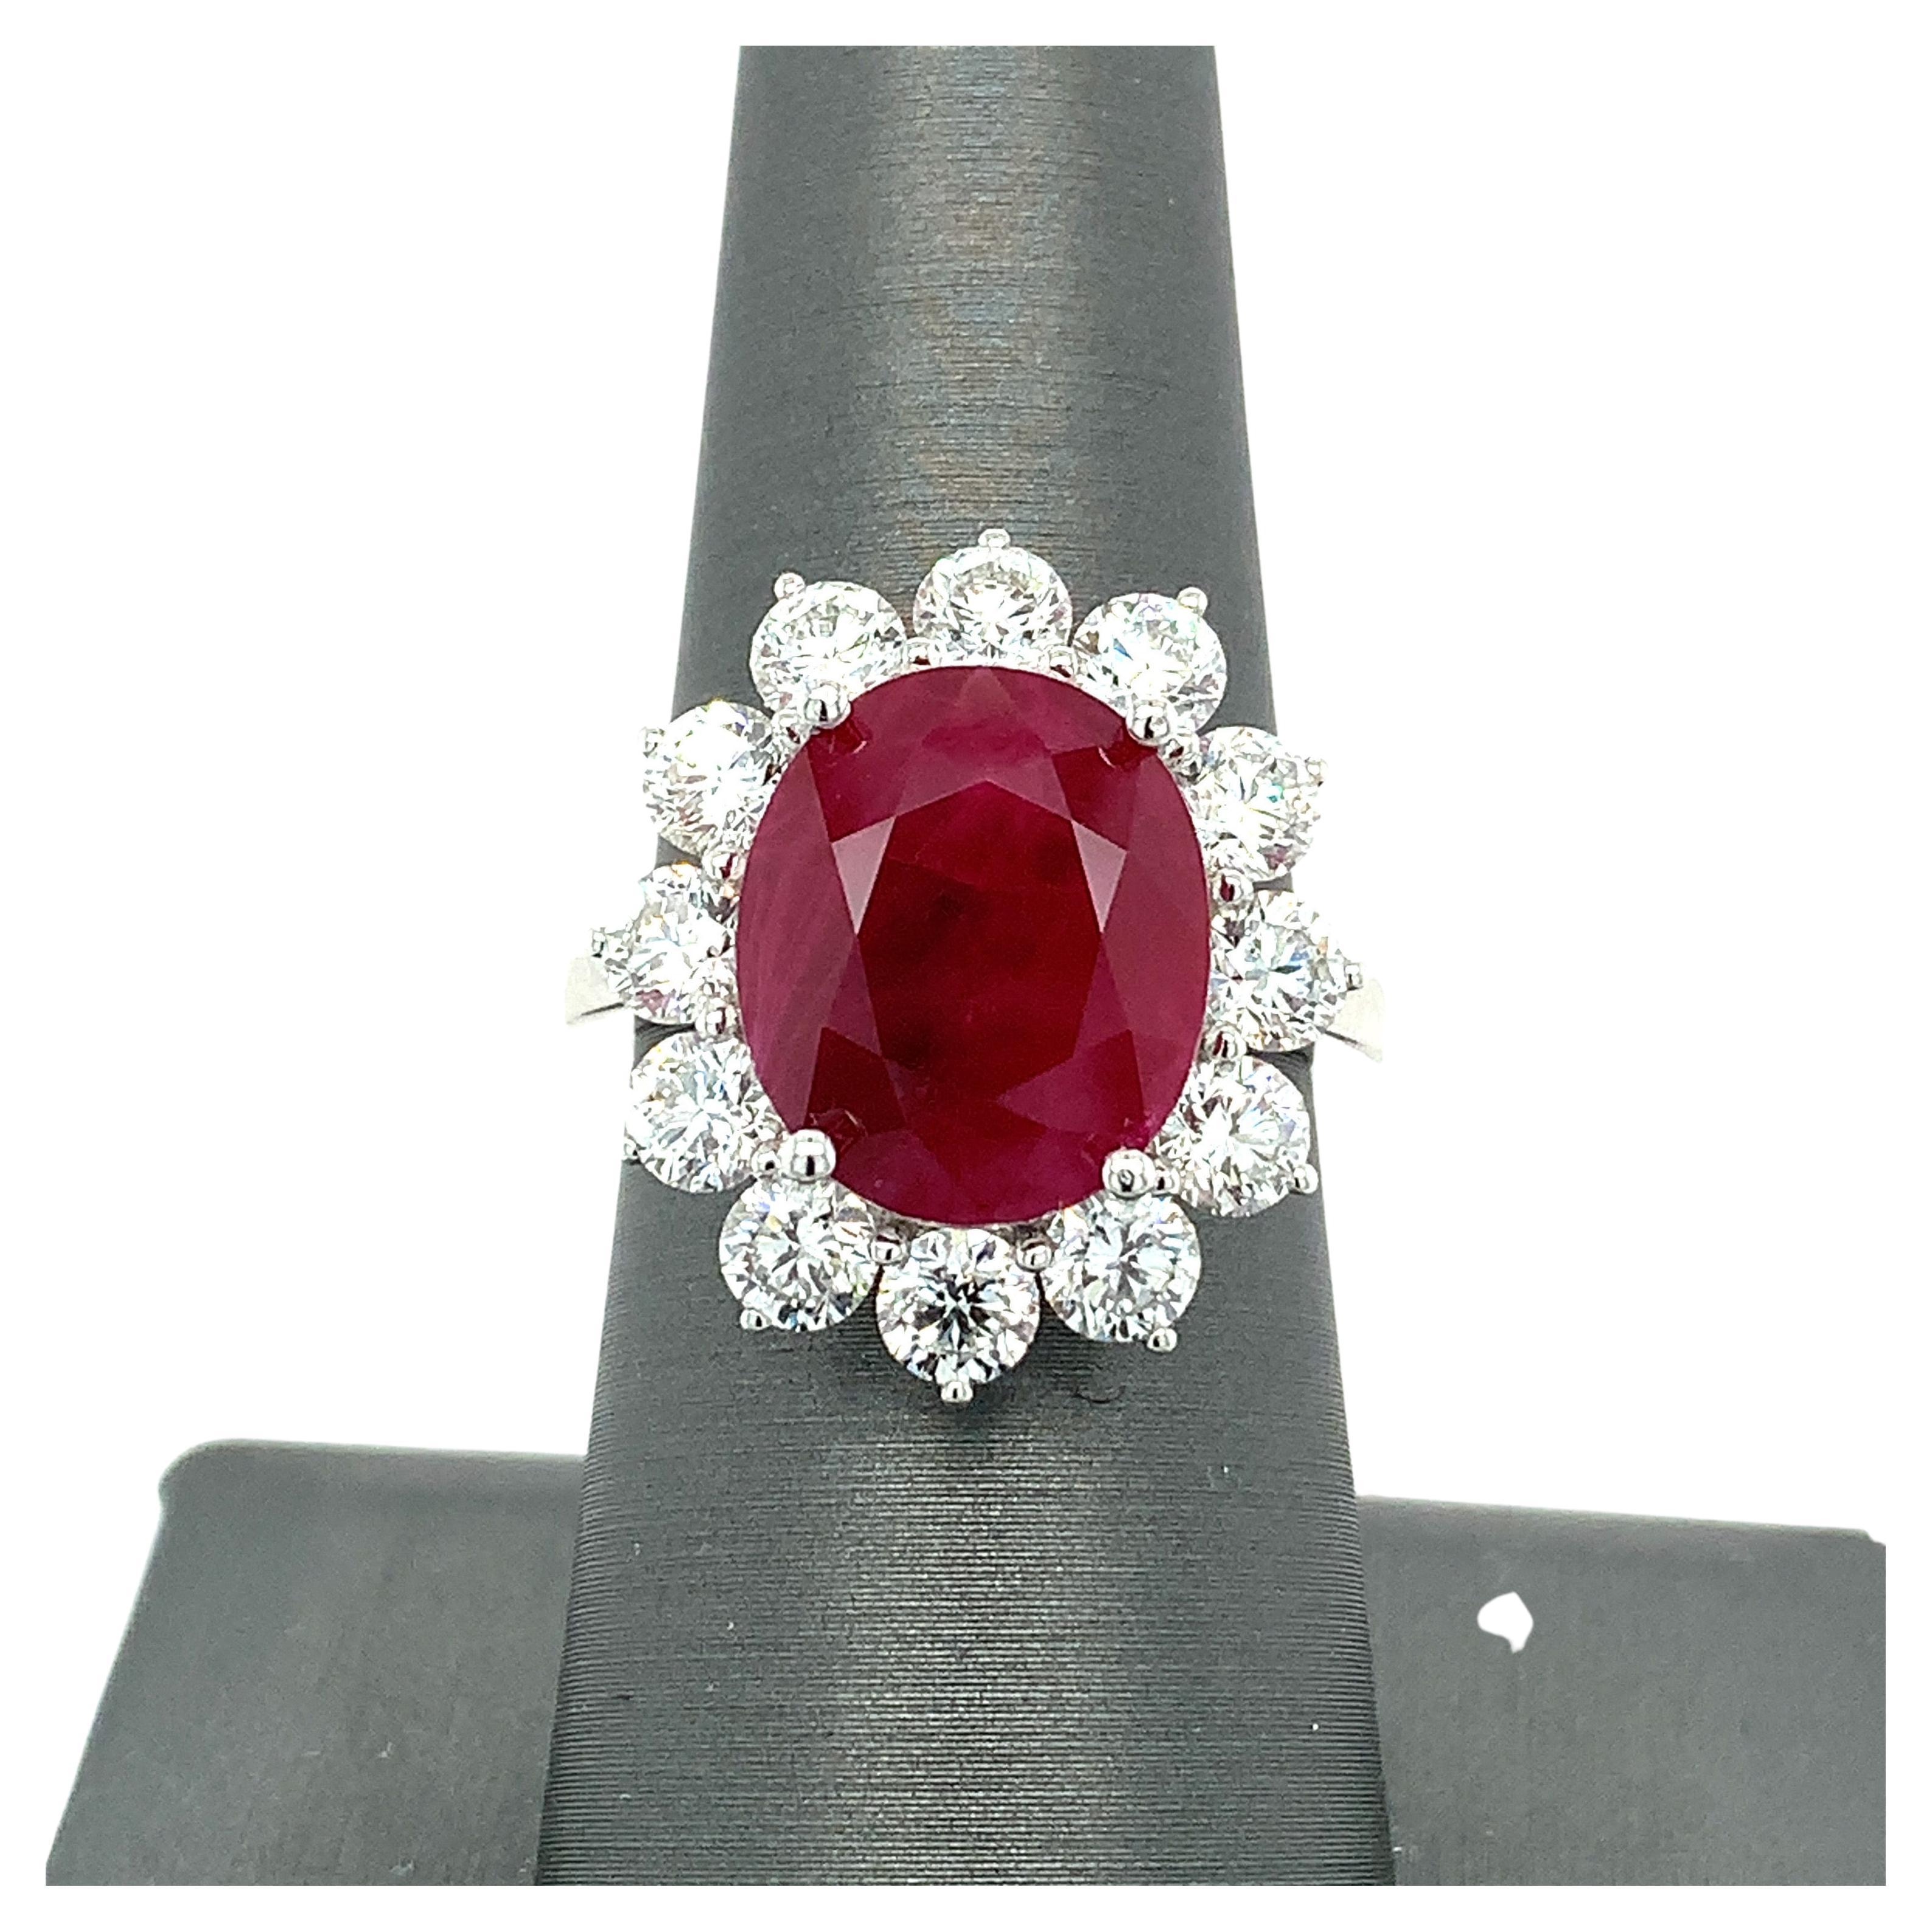 This opulent ring boasts a highly coveted 8.31 carat GRS certified Oval Burmese Ruby surrounded by sparkling halo of 2.80 carat round white diamonds. This Princess Diana inspired ring is hand crafted with the classic four prongs setting in 18K white